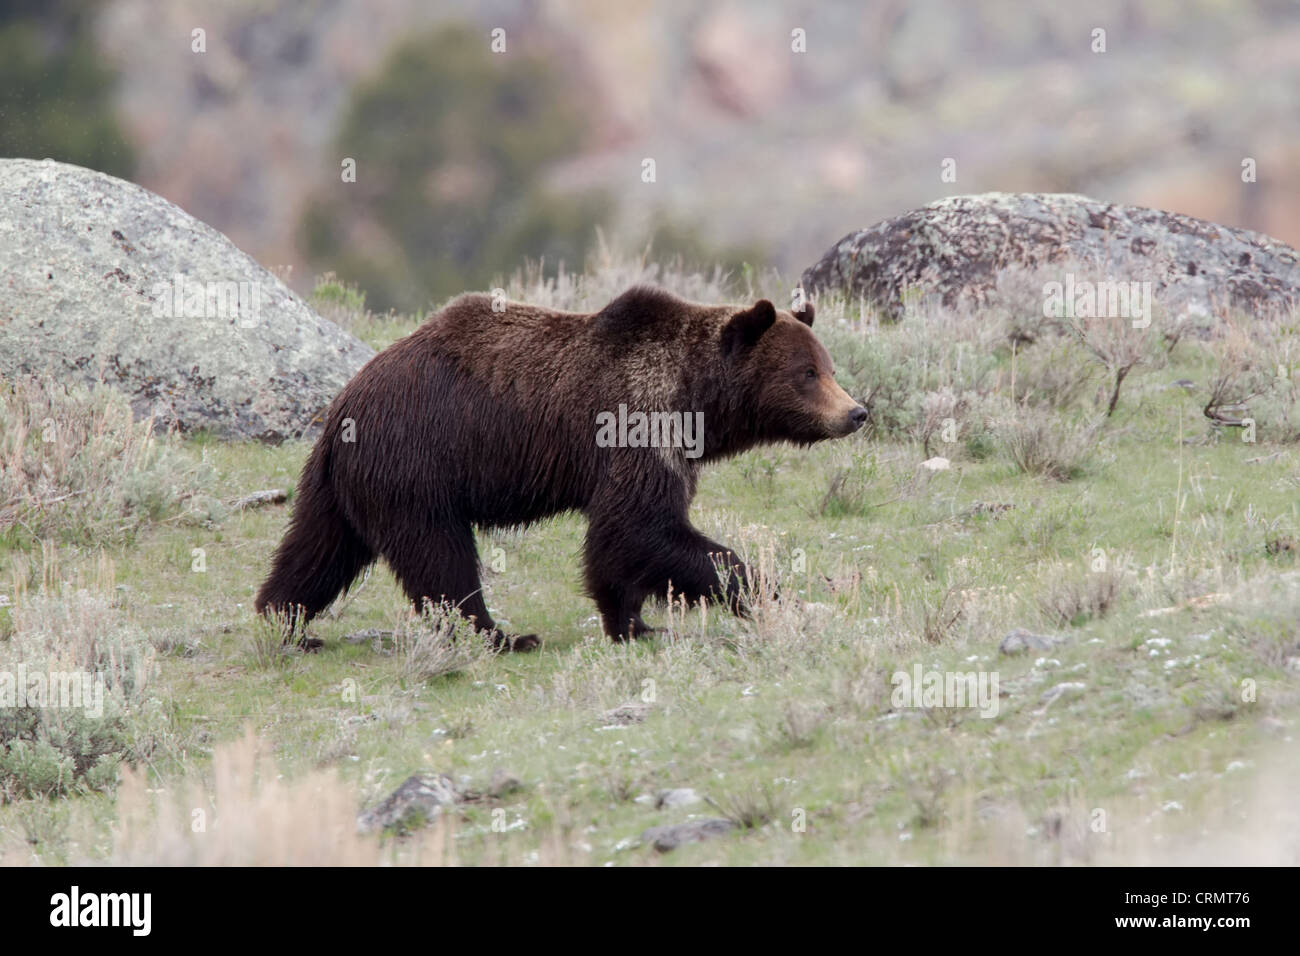 A wild Grizzly bear crosses open ground in the Lamar Valley of Yellowstone National Park, Wyoming, USA. Stock Photo